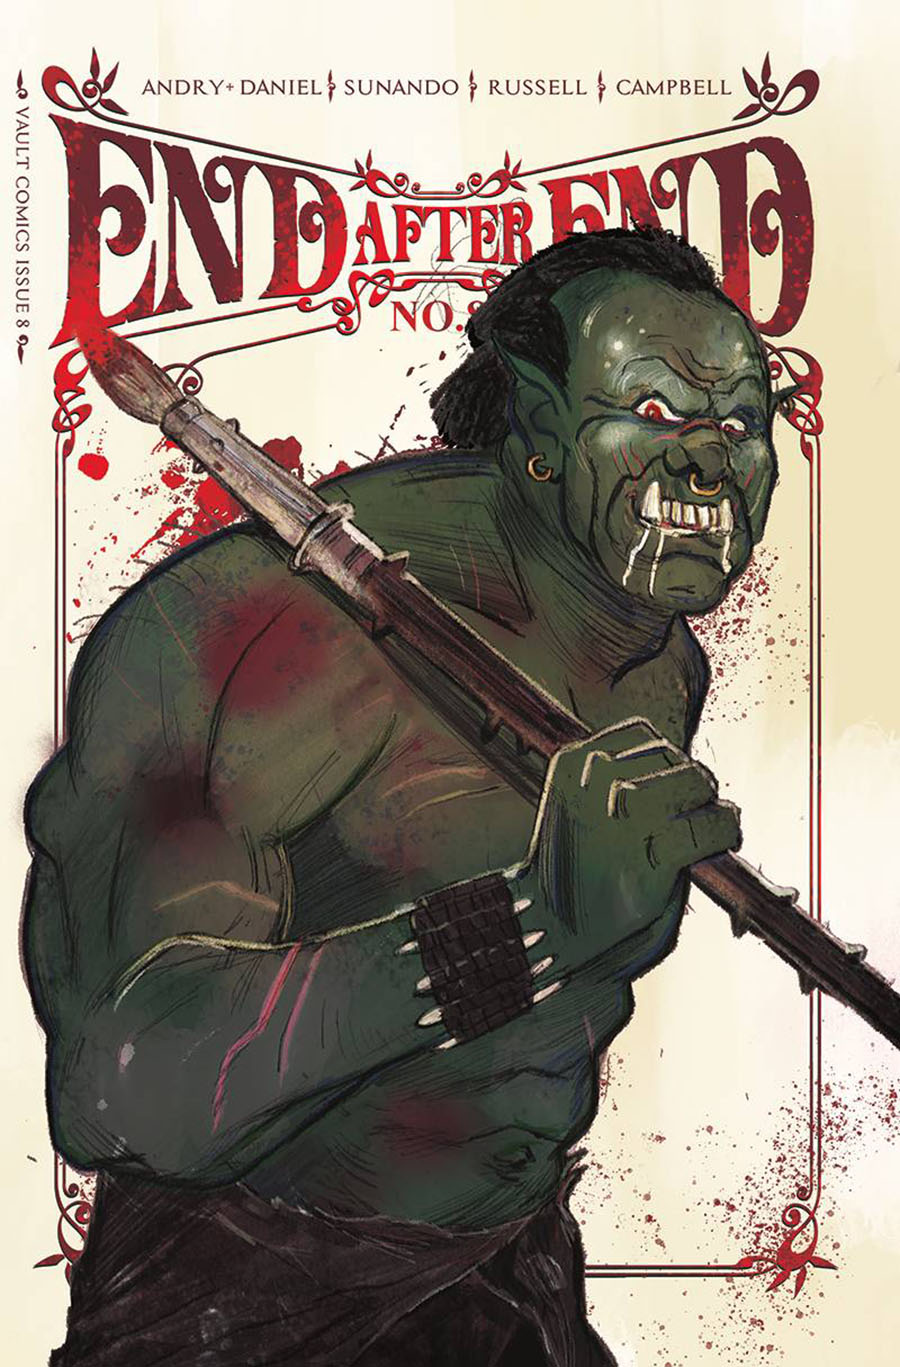 End After End #8 Cover A Regular Sunando C Cover